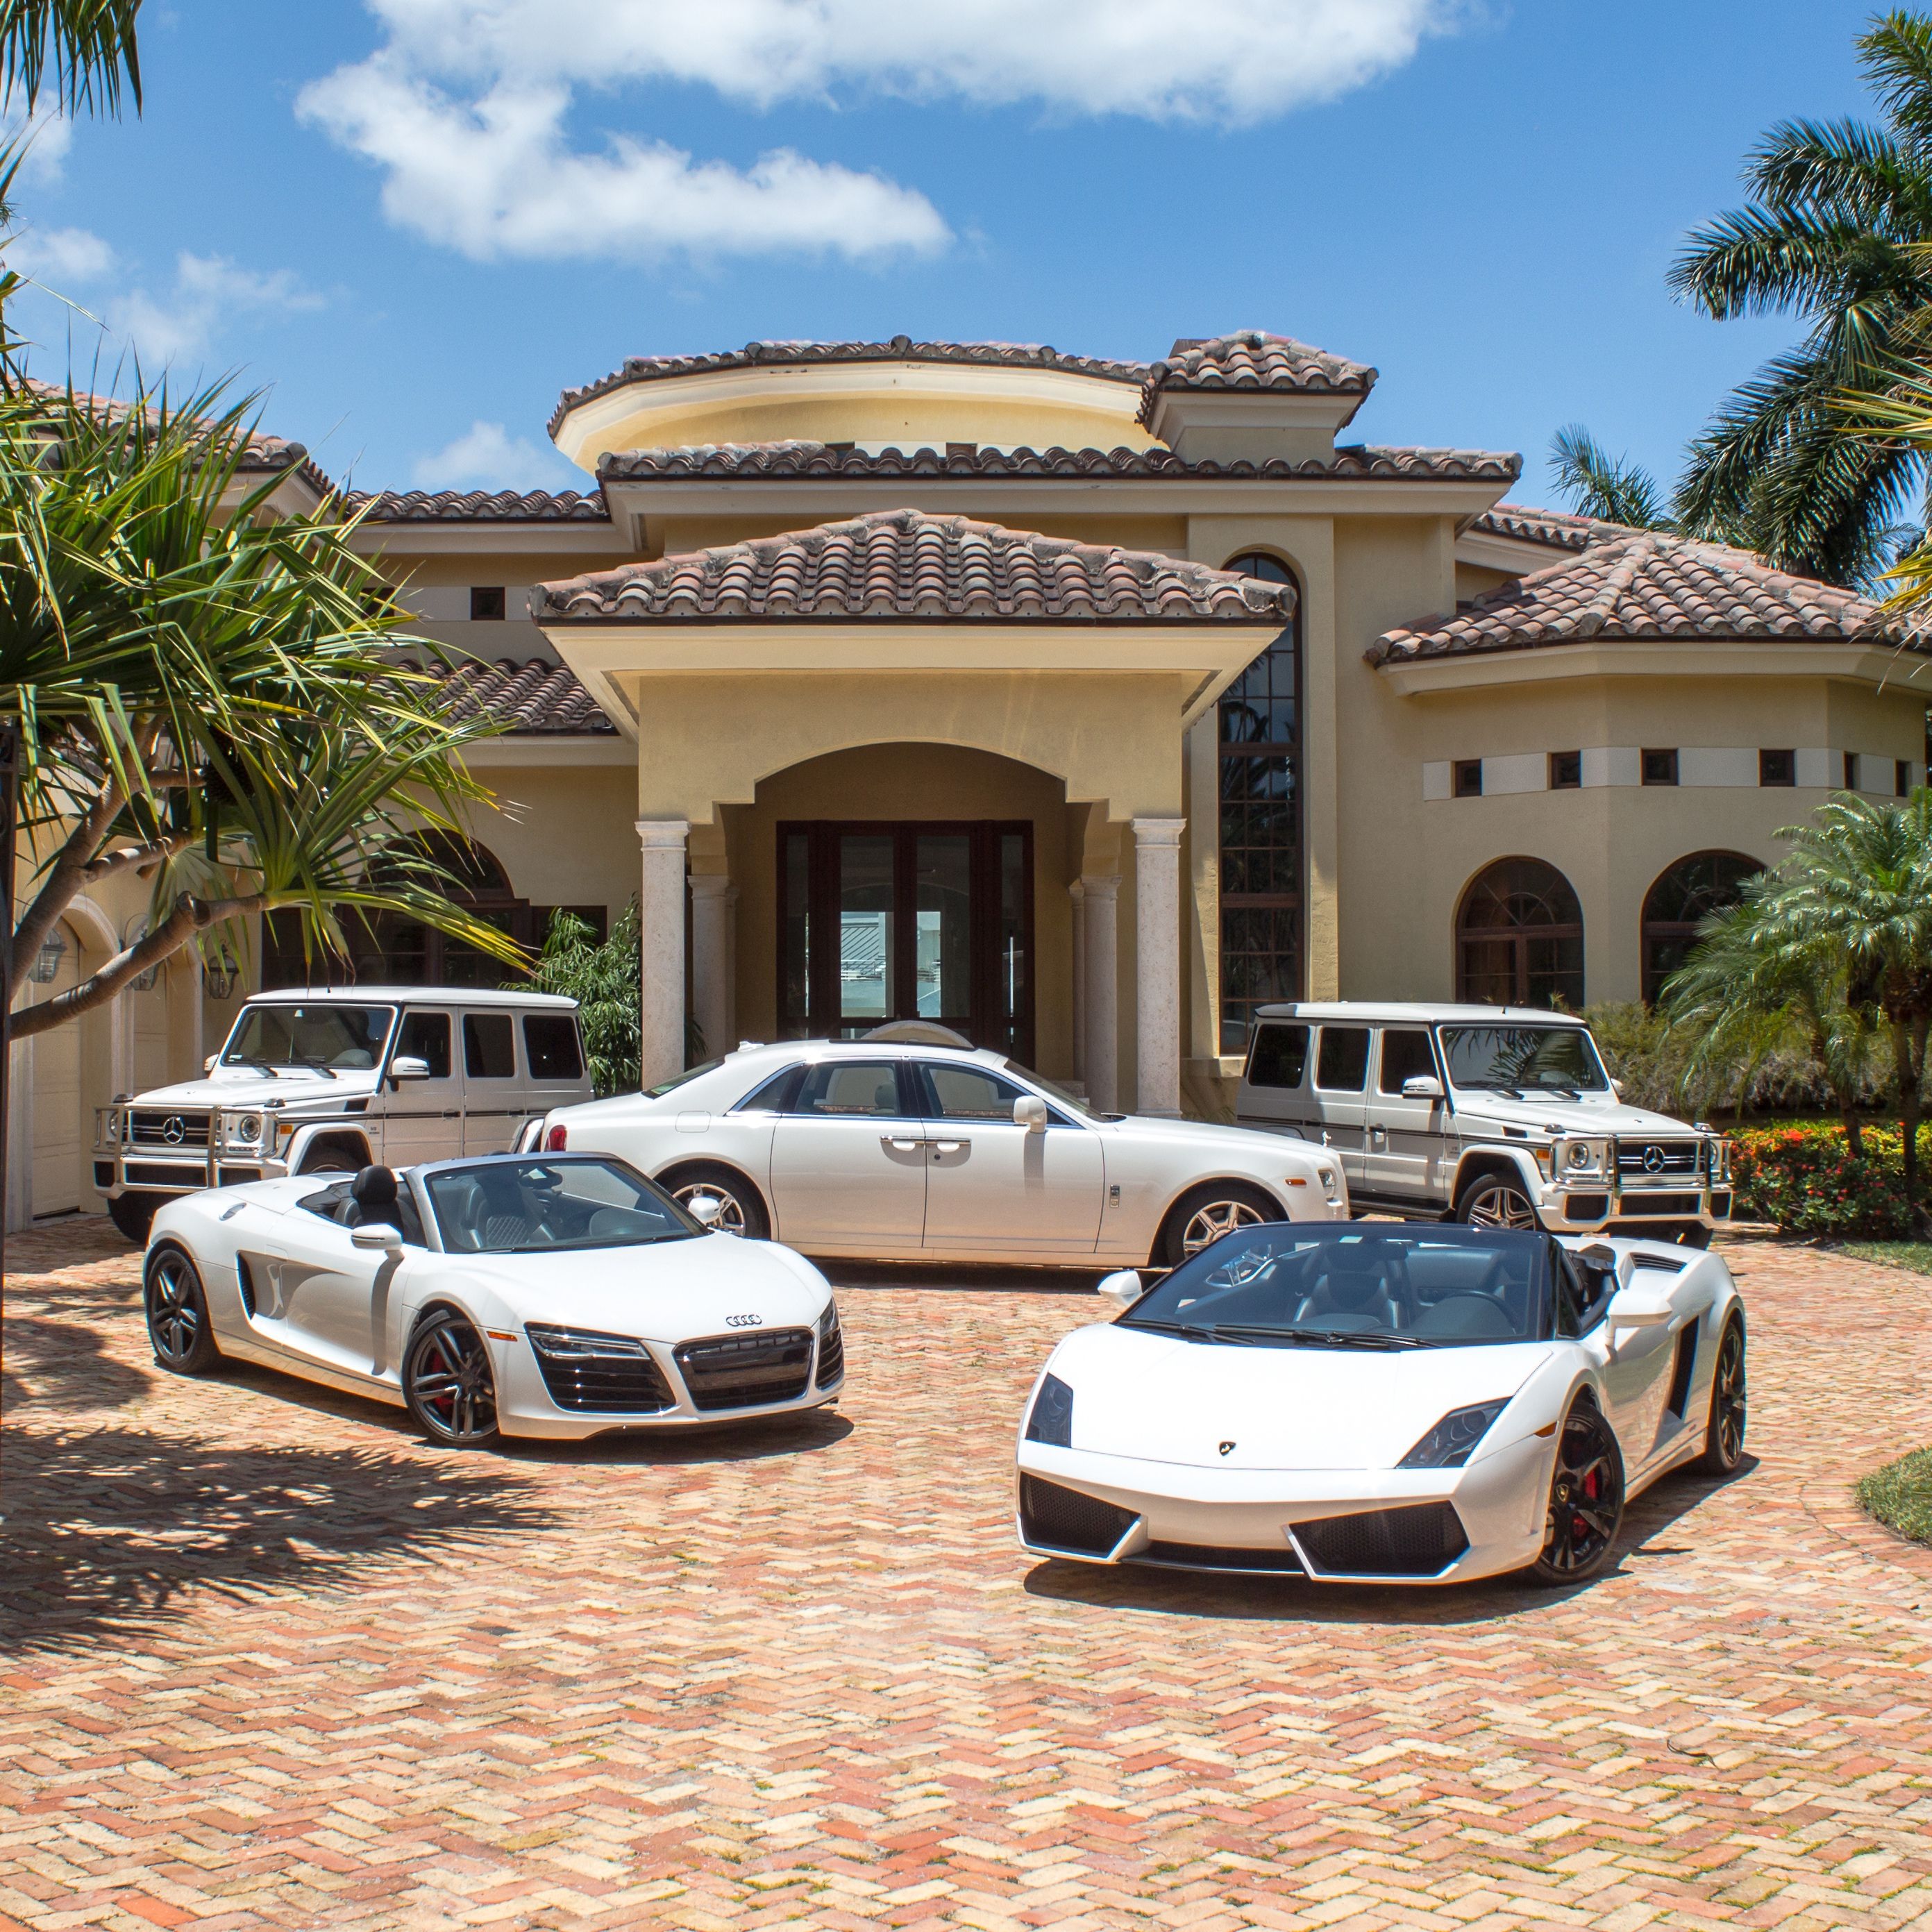 Exotic Mansions and Cars Wallpaper